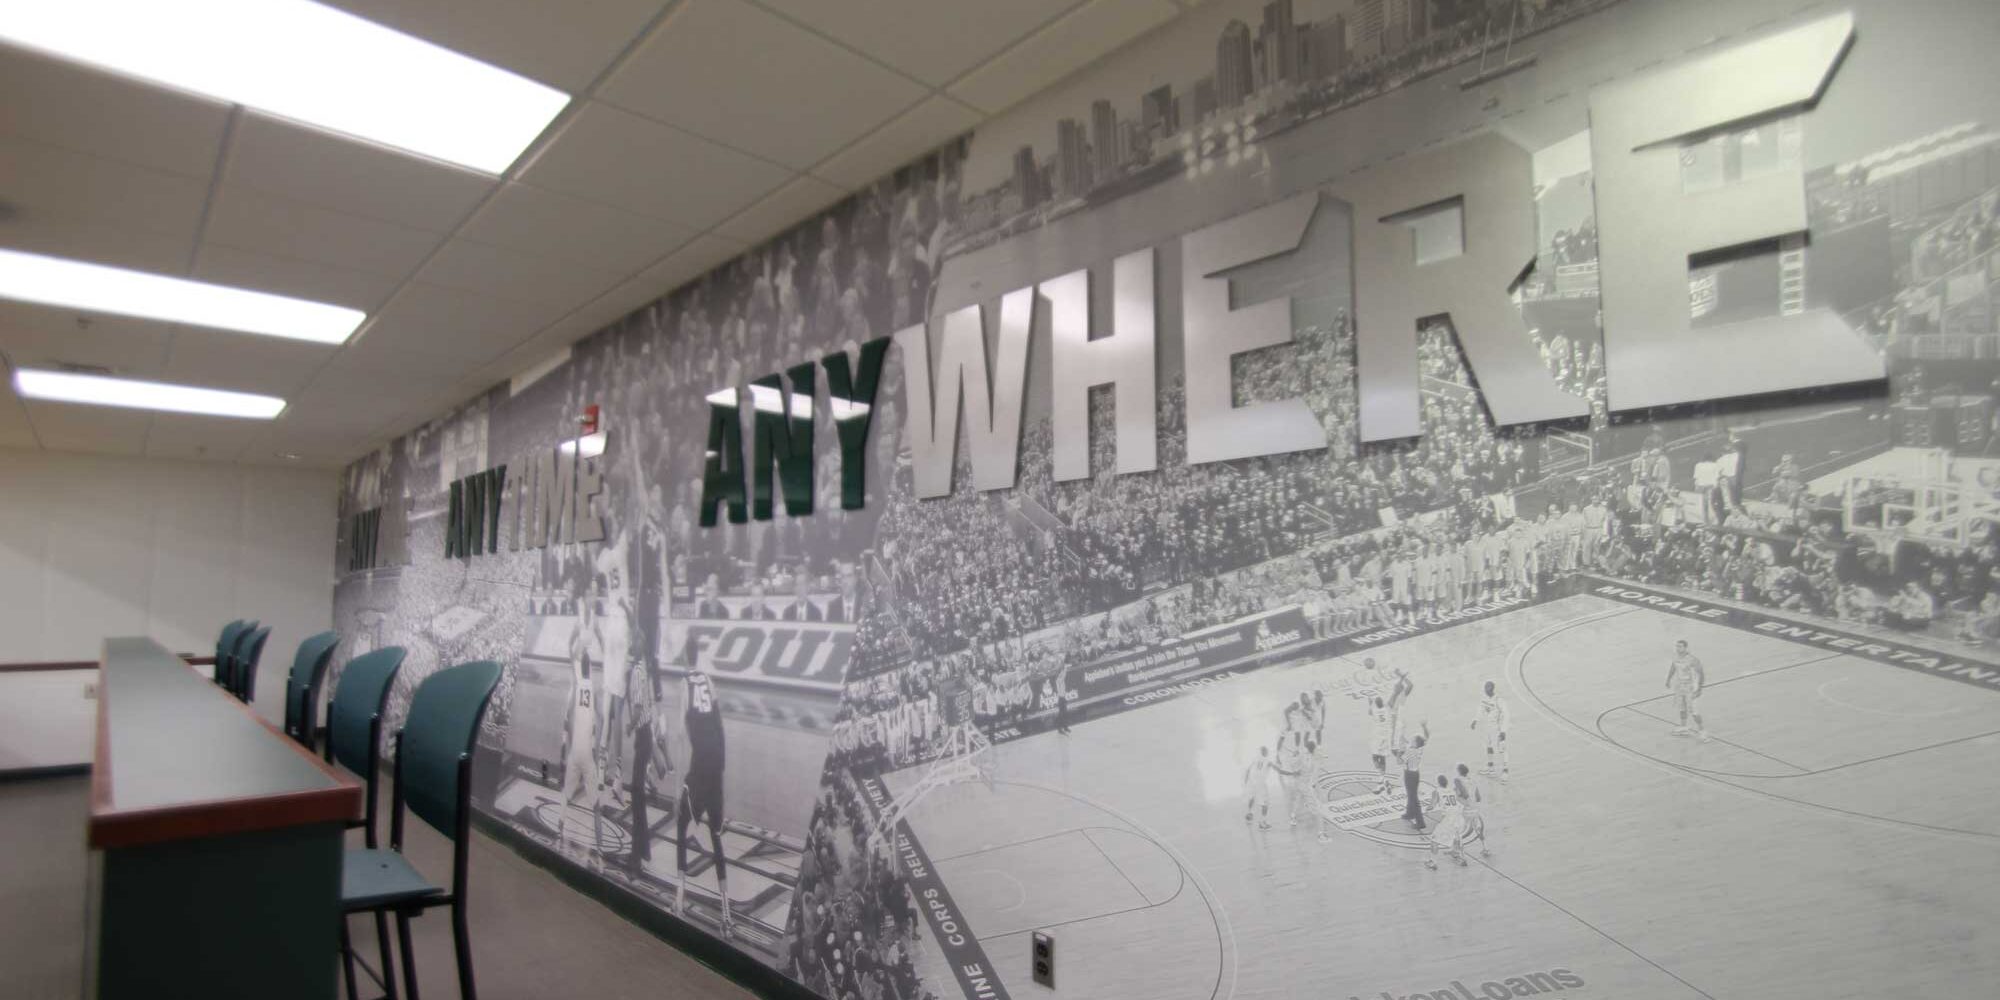 wallcovering of basketball images for a conference room